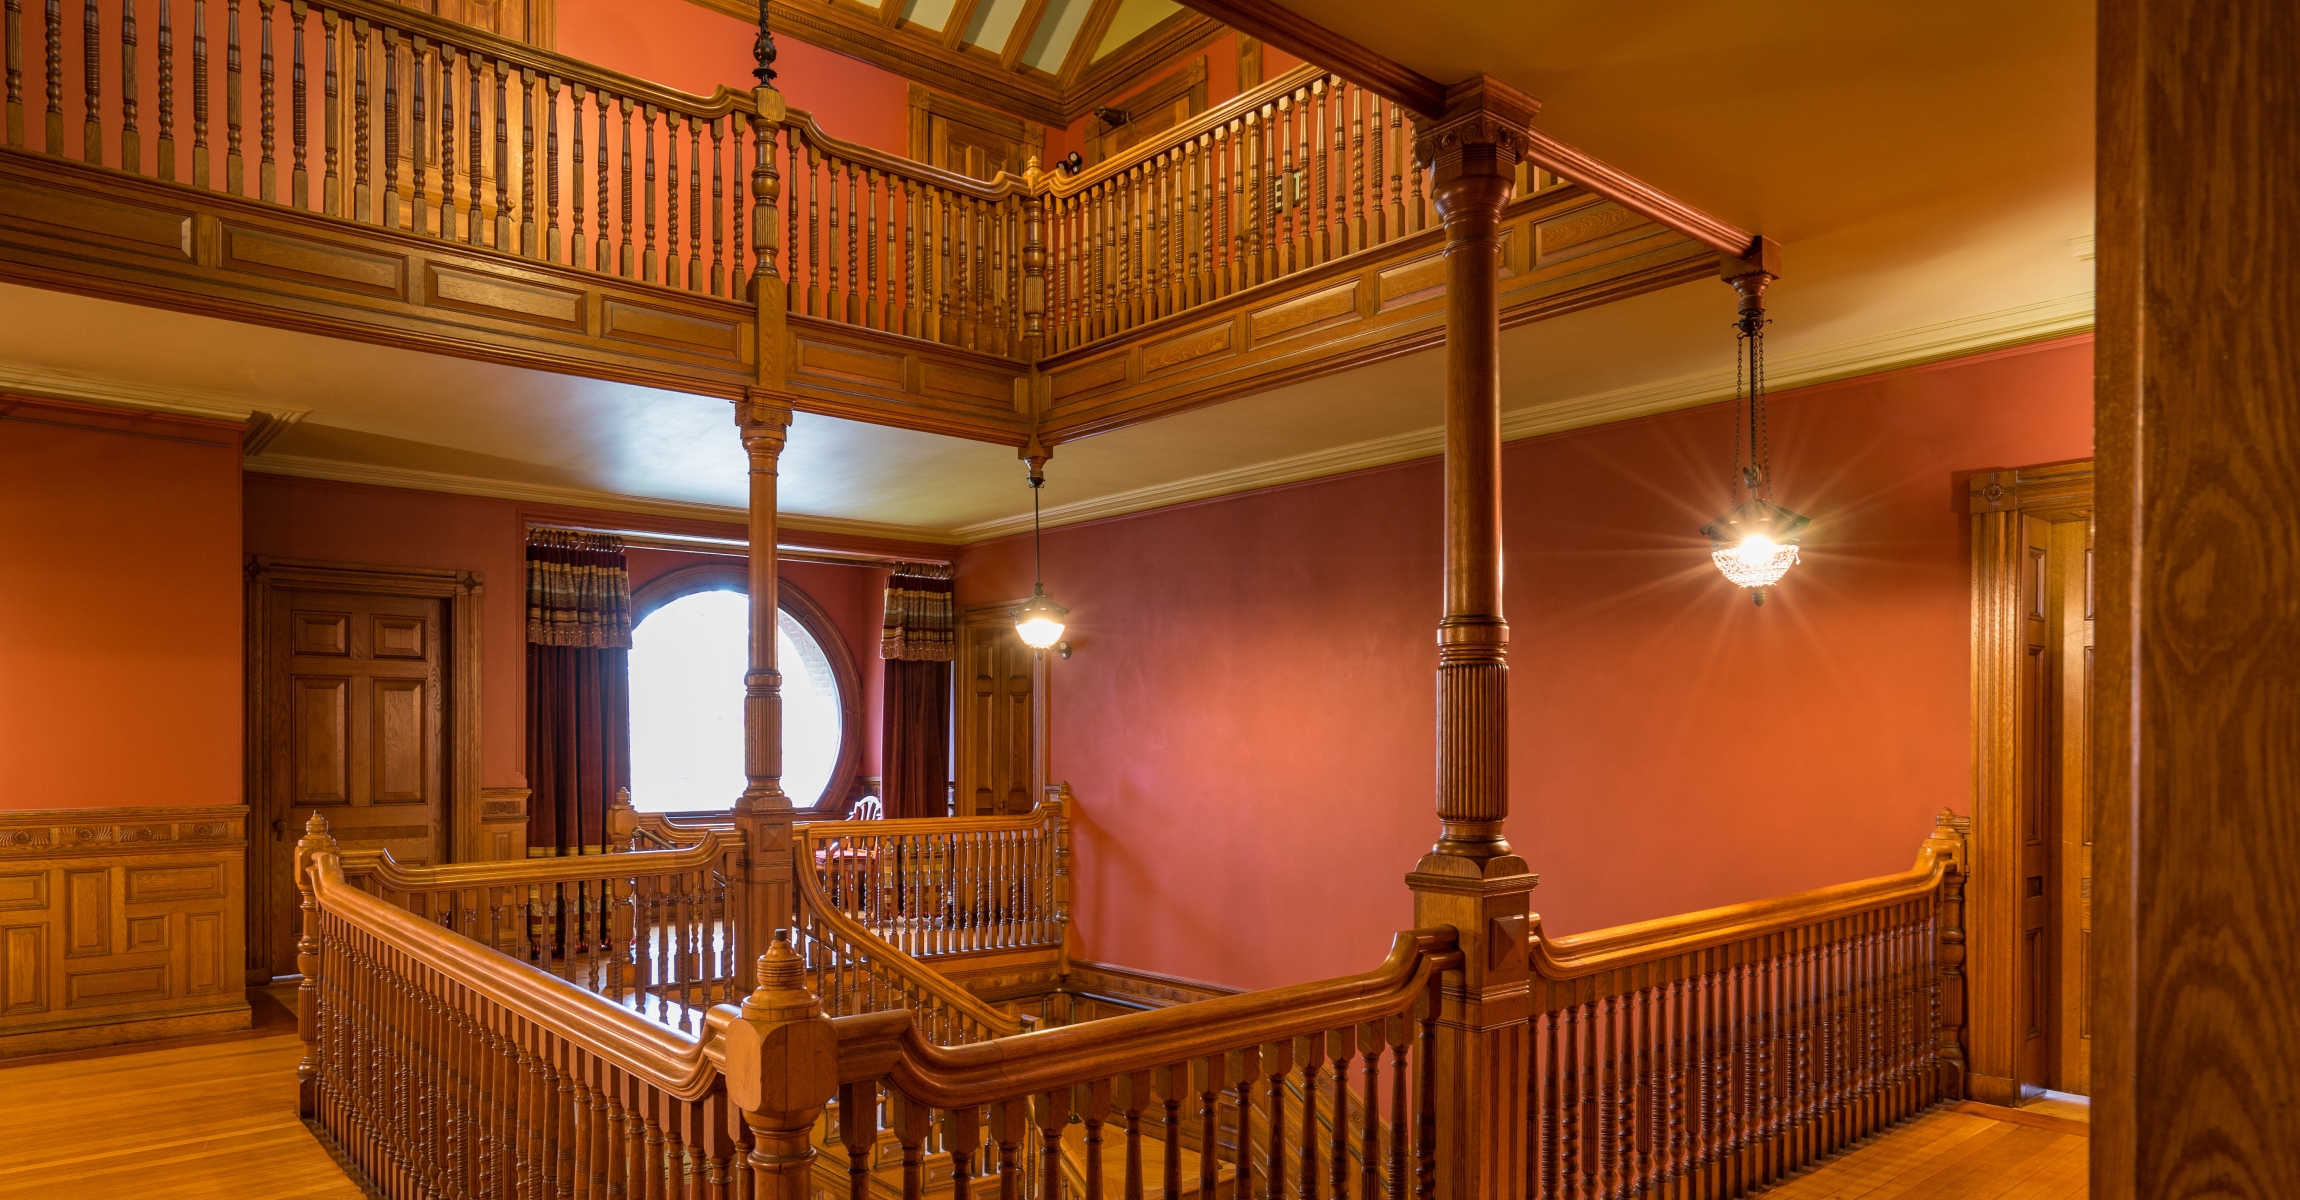 Wood railings around top of staircase and around the floor above, wood columns, hanging light fixtures, round window surrounded by maroon curtains.